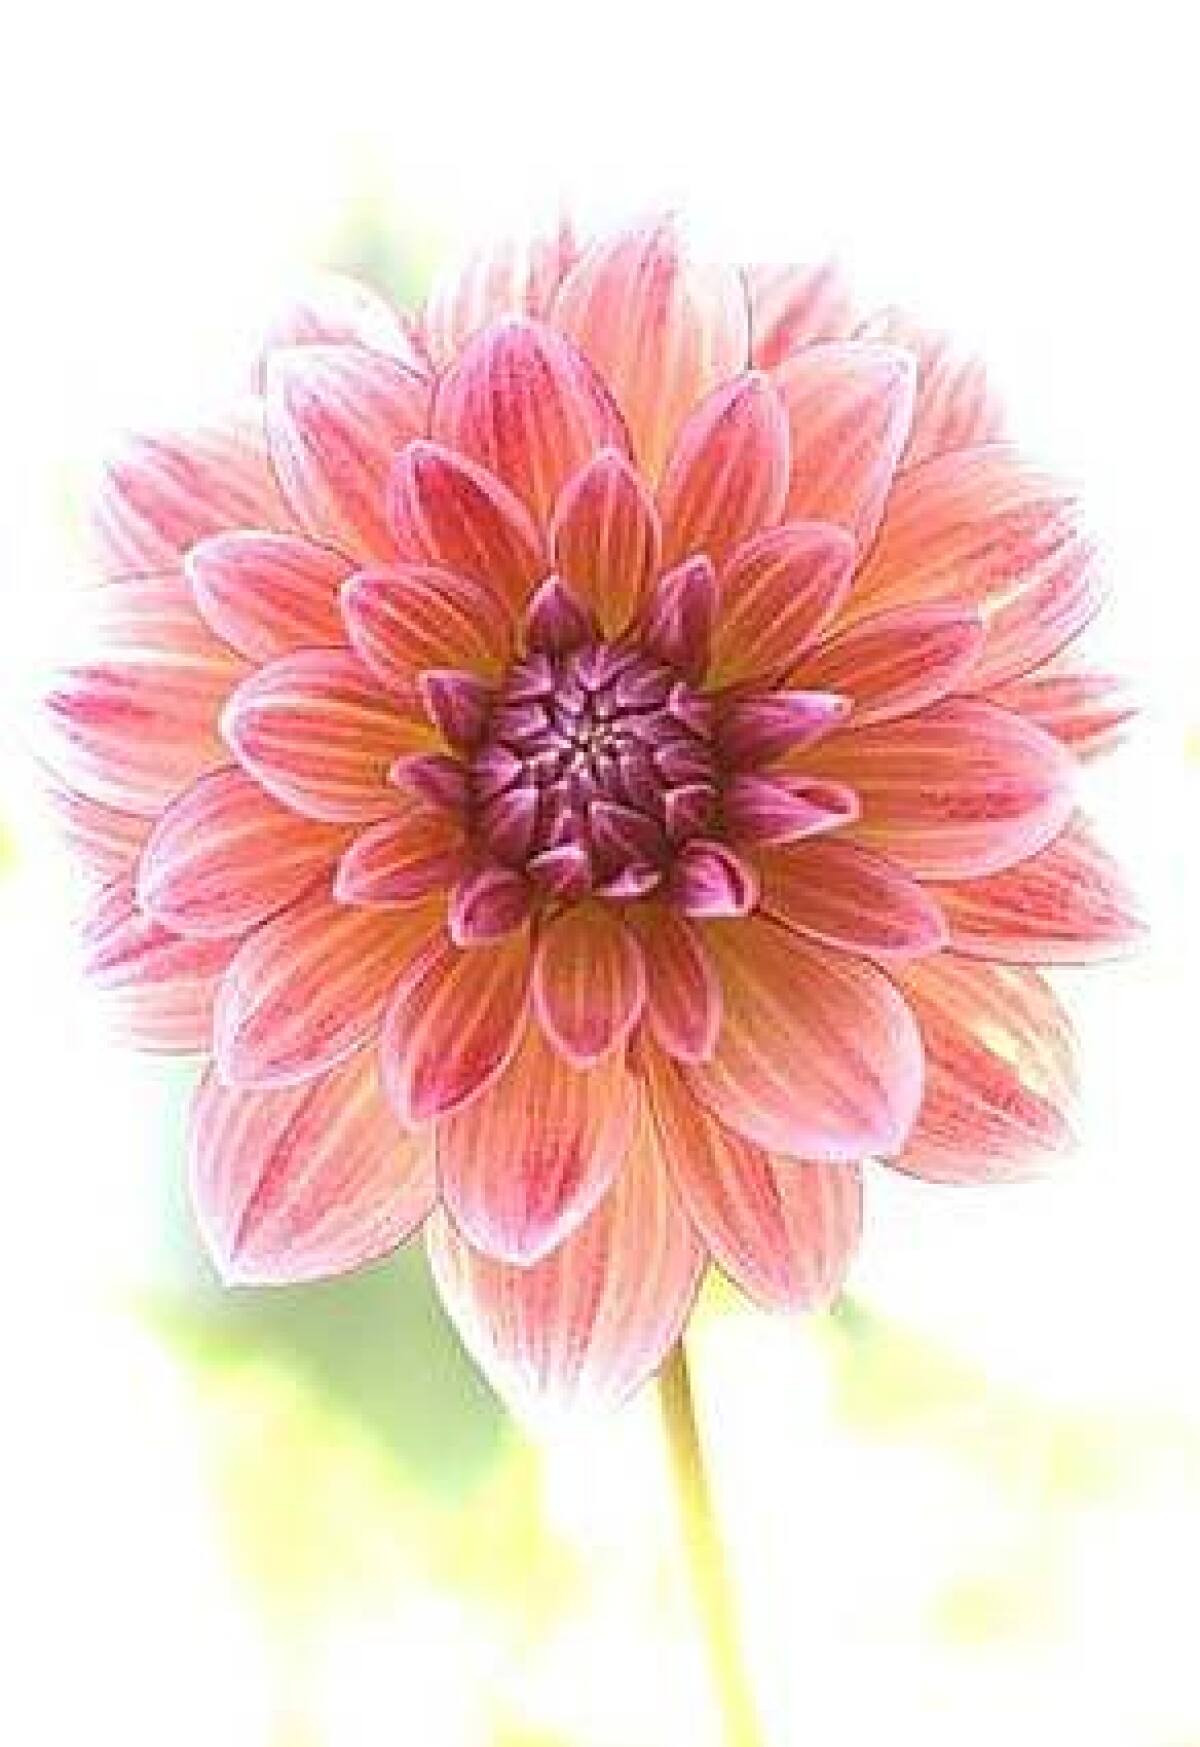 The dahlia isn't just pretty in pink. Thousands of color combinations, shapes and sizes give this flower its power to surprise and delight. The hearty blooms need careful cultivation, especially in the heat, but the payoff? Devotees say it's nothing short of astounding.